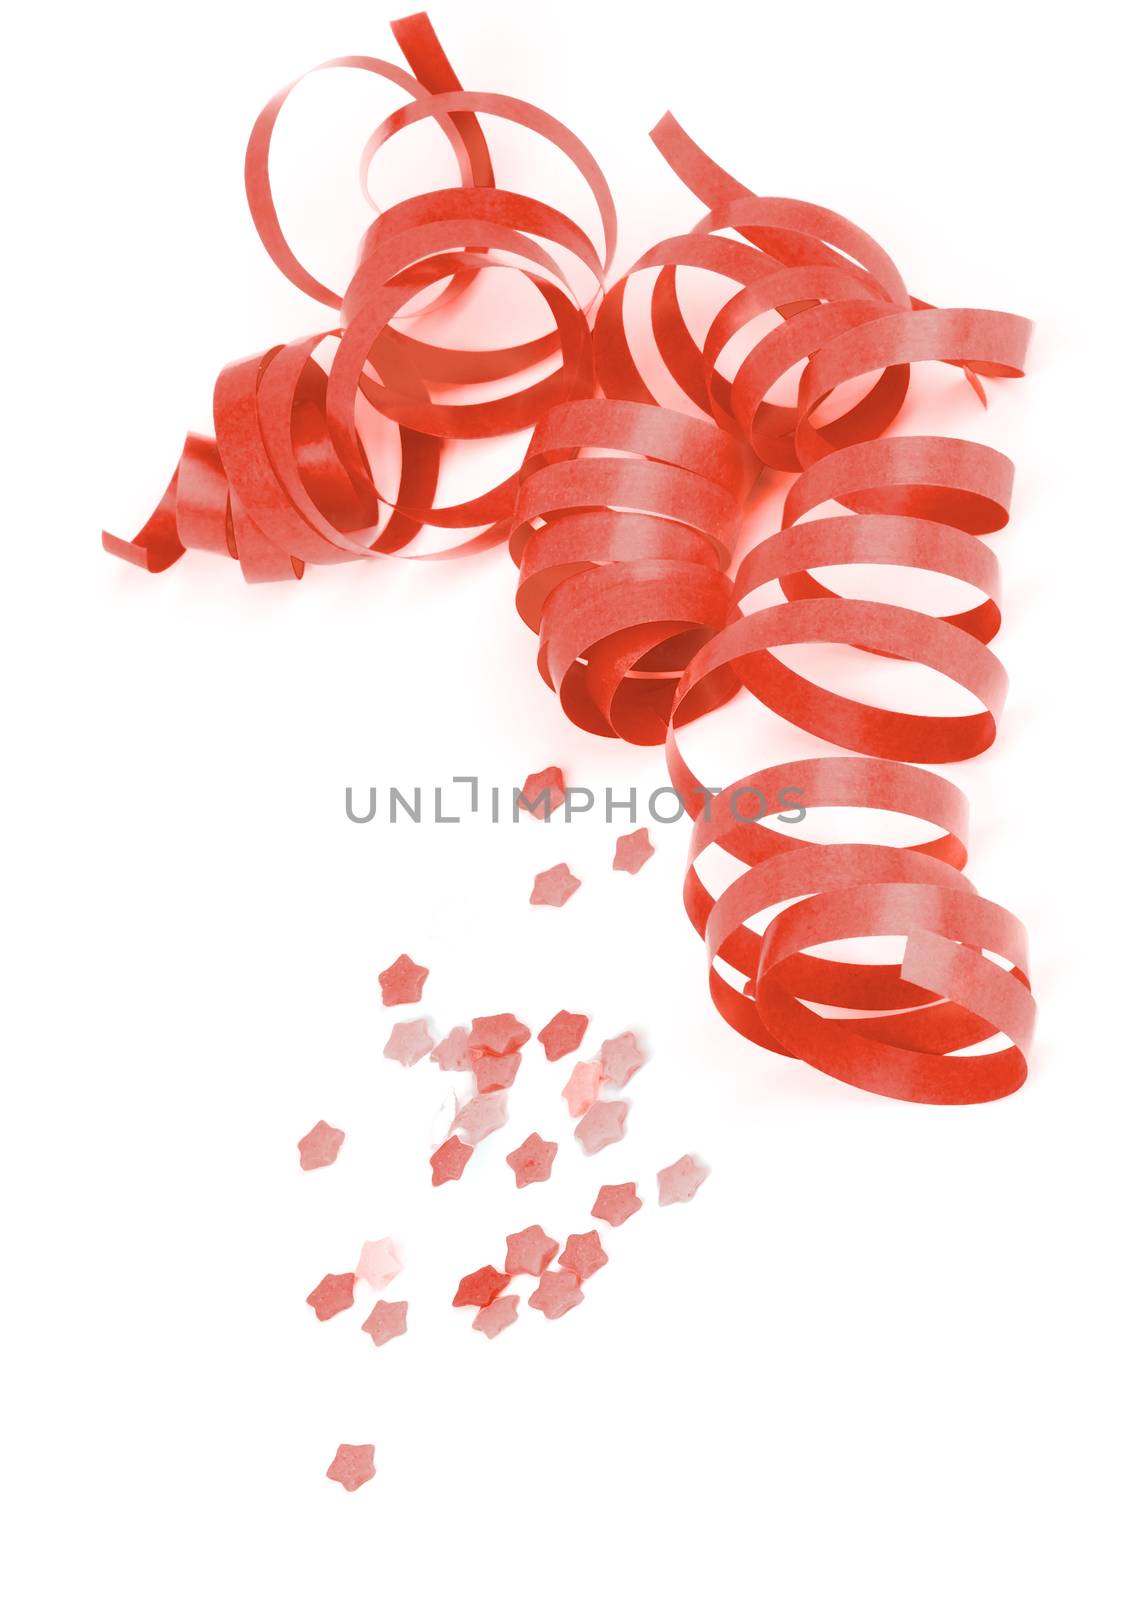 Red Curled Party Streamers and Star Shape Confetti isolated on White background